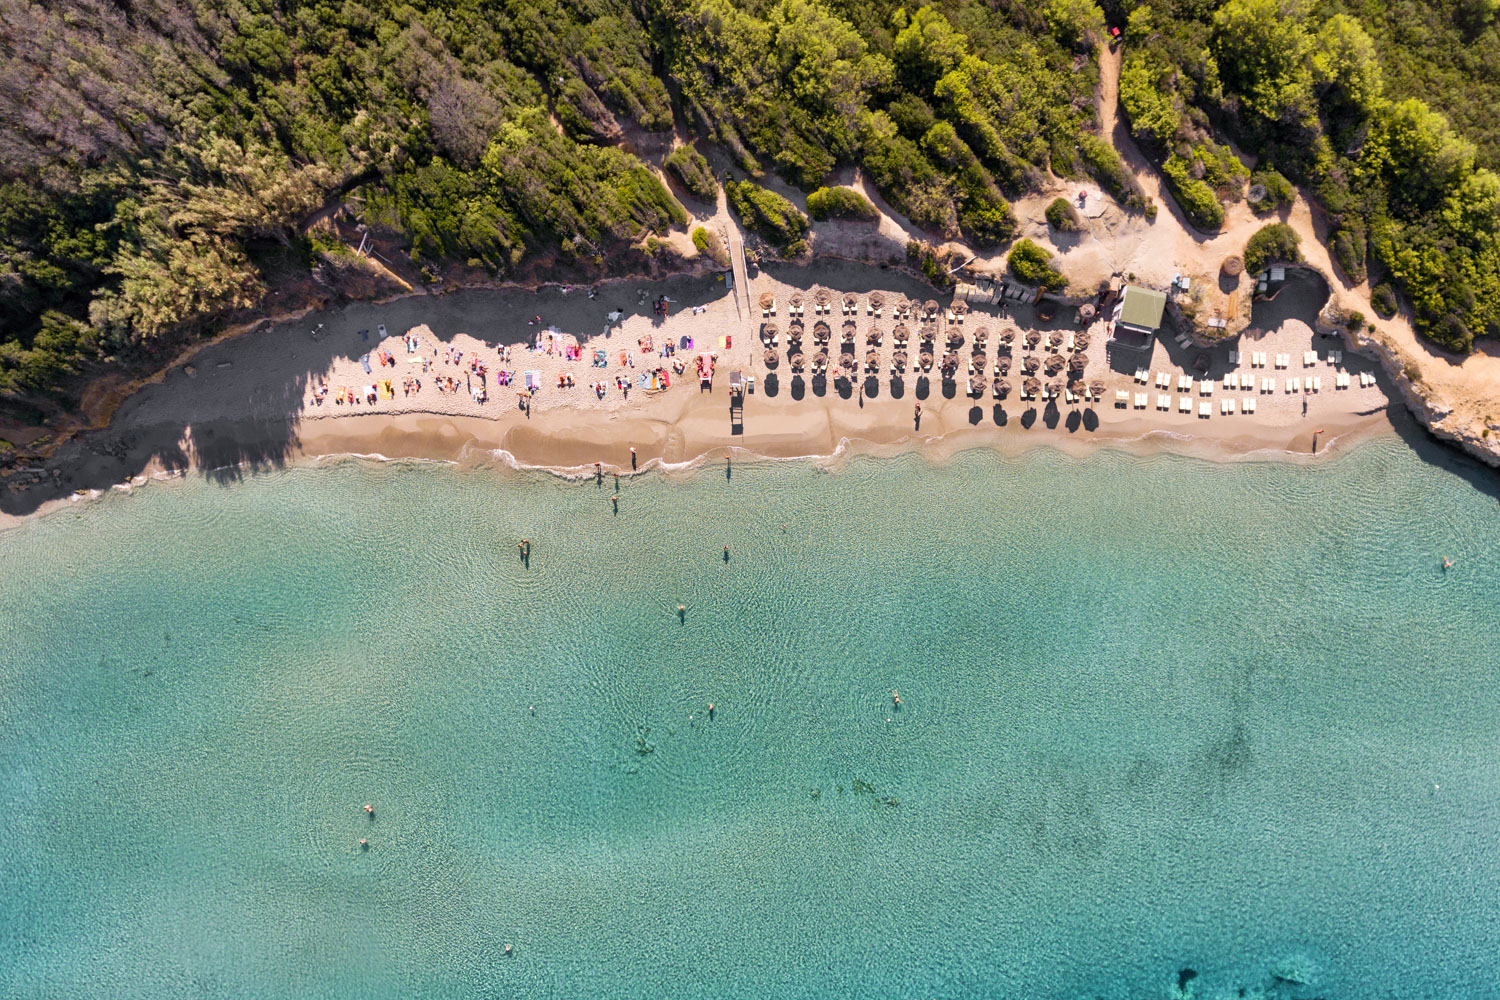  Aerial Photography of Puglia Region, Italy by Joas Souza Photographer - All Rights Reserved. 